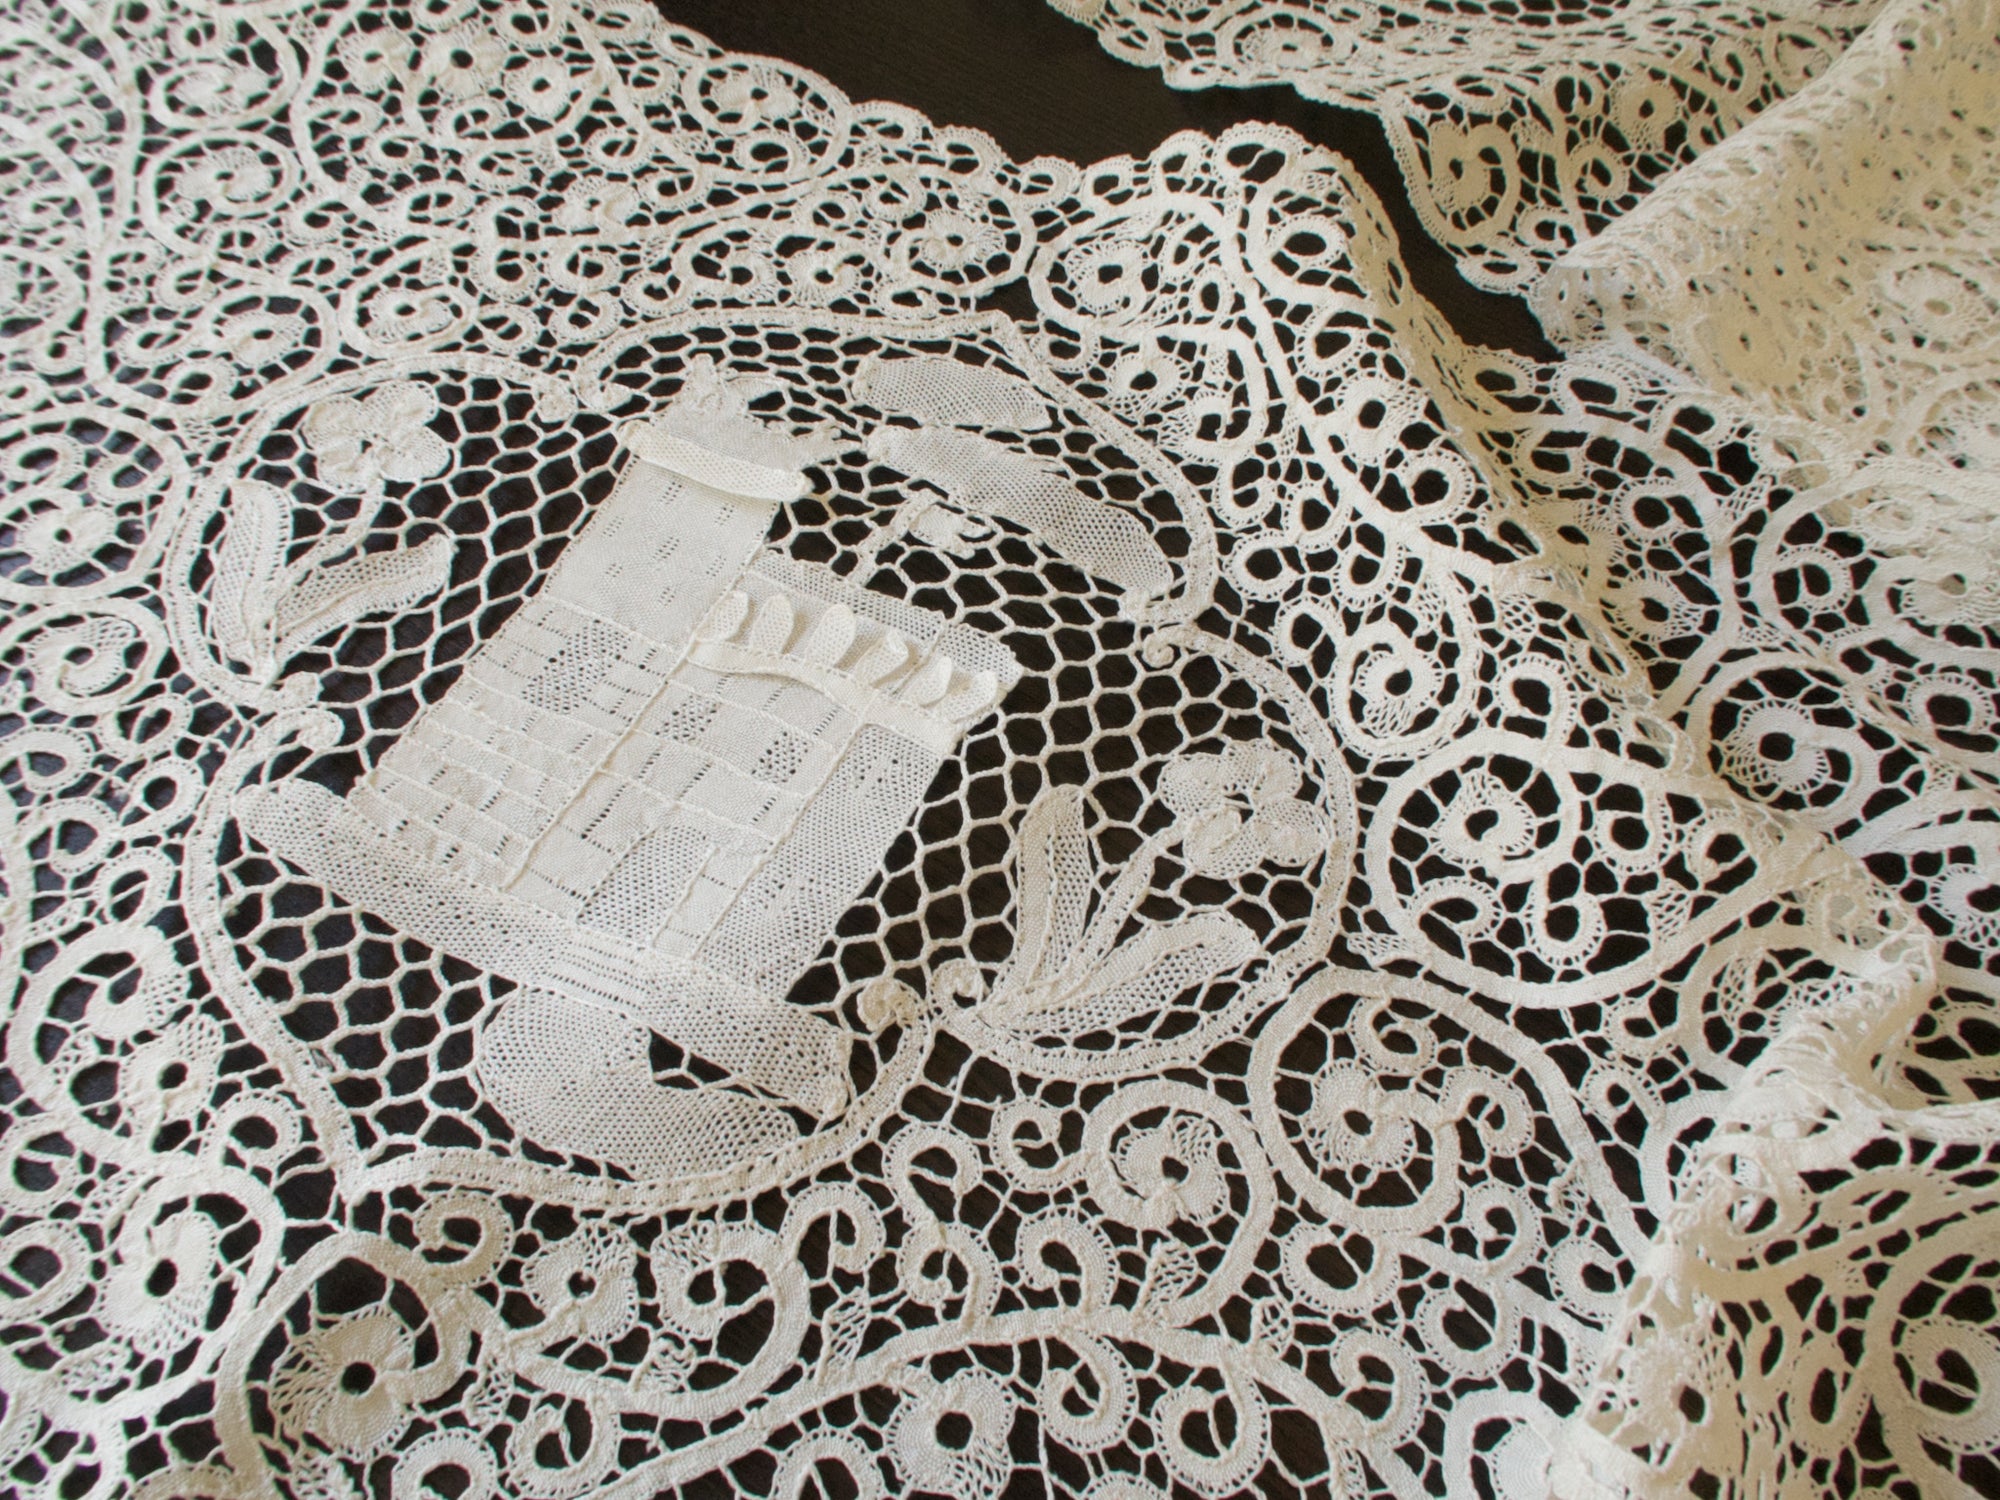 Antique Cantu Lace Table Runner Castles and Troubadours 10x116"